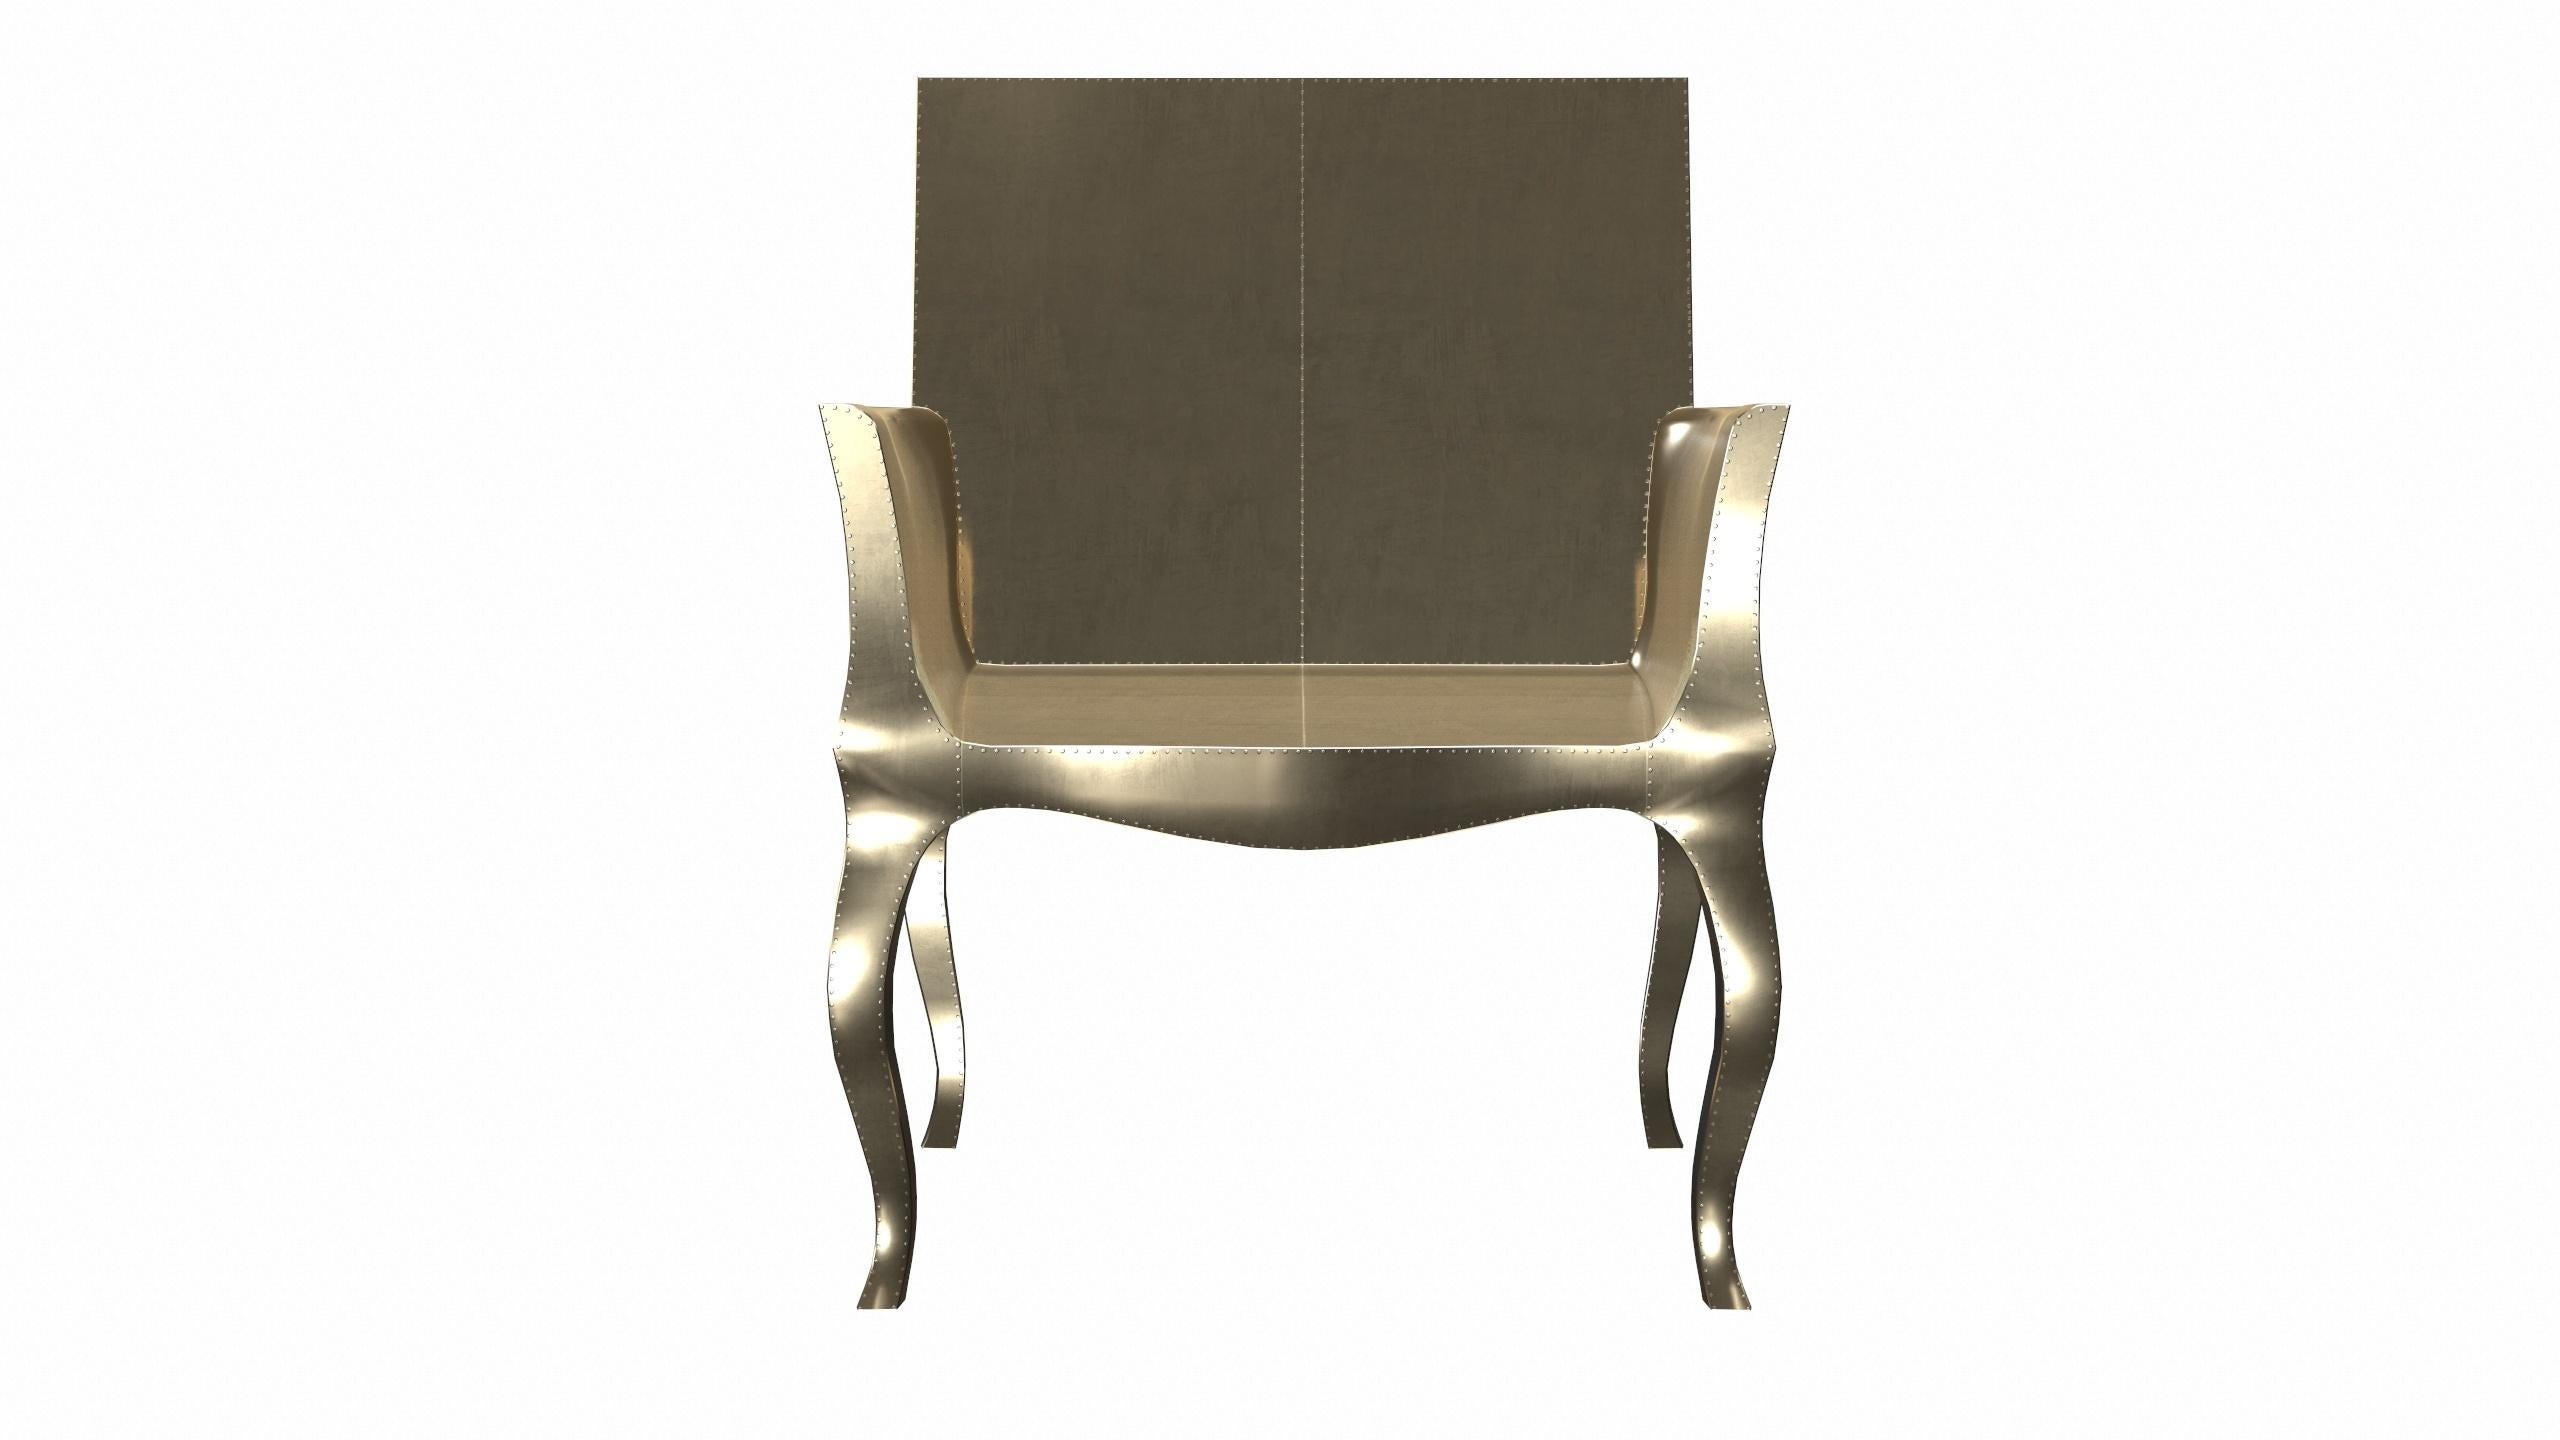 Indian Art Deco Chairs in Smooth Brass by Paul Mathieu for S. Odegard For Sale